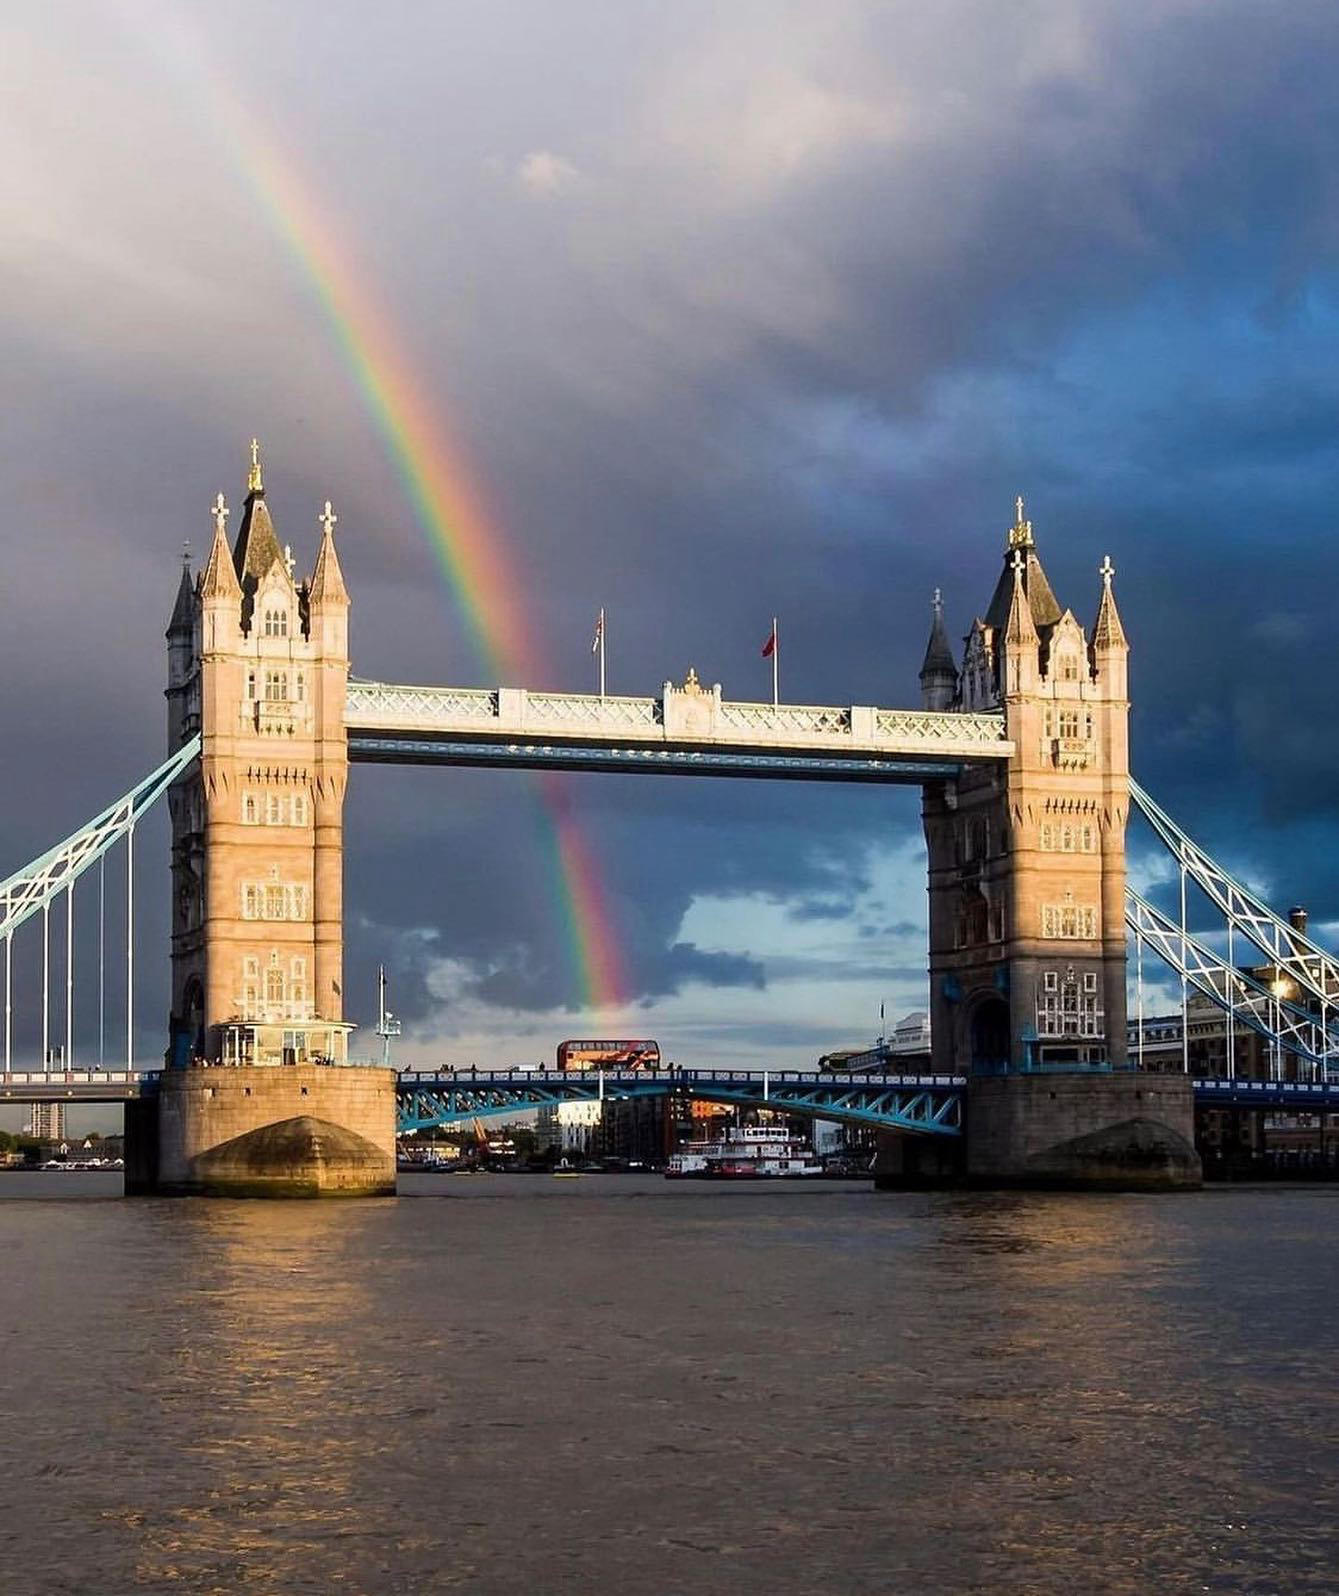 London Unexpected - Somewhere over the rainbow…